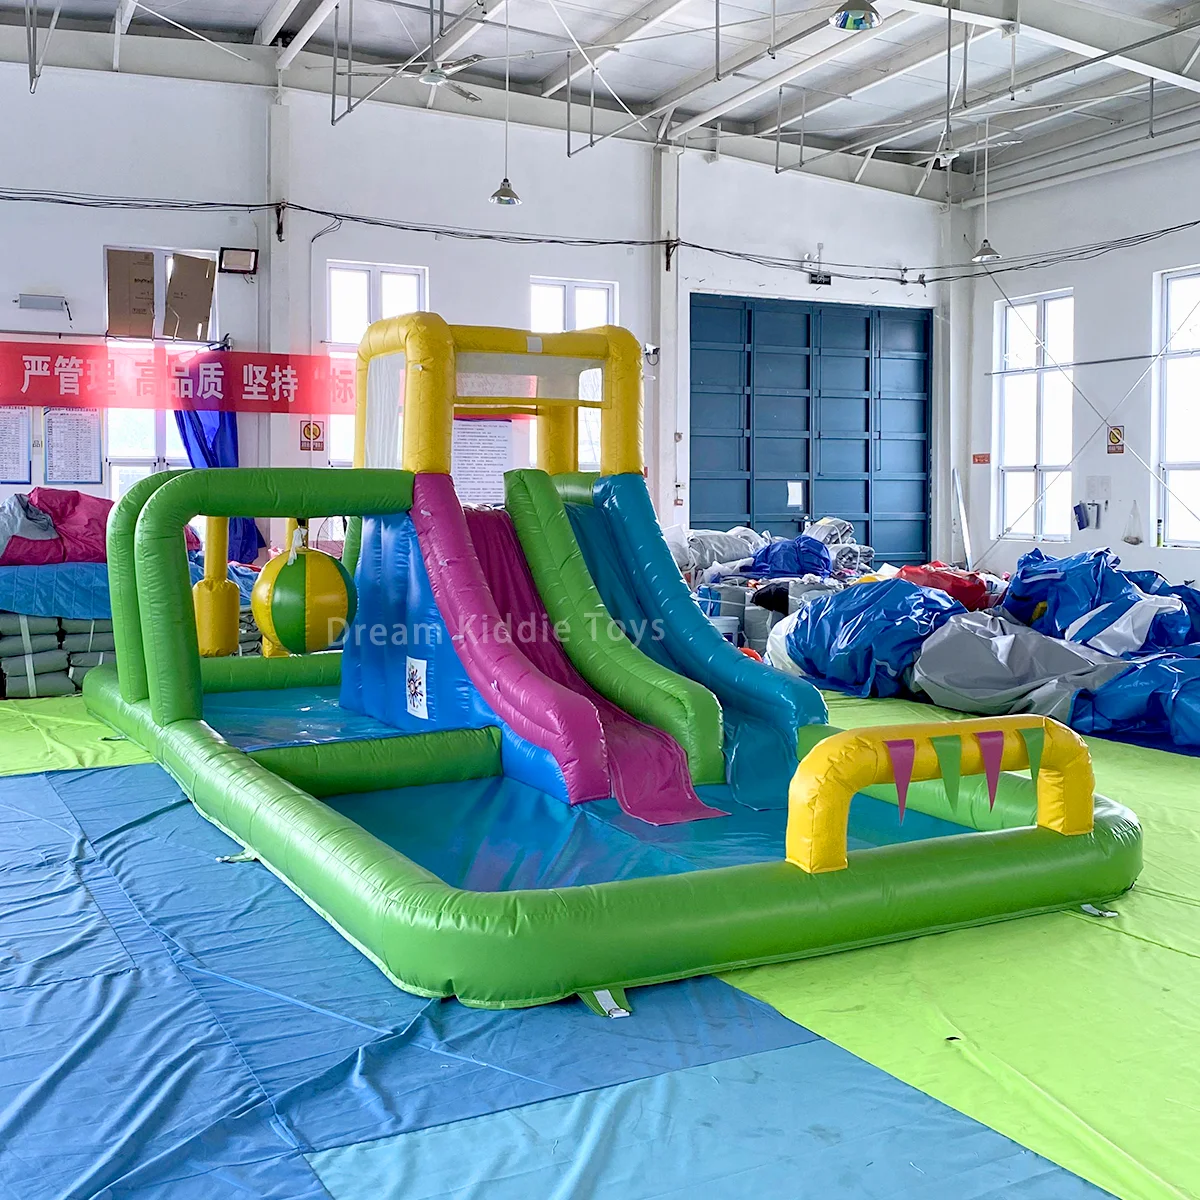 

Small PVC blow up inflatable water pool with slide for kids double slides inflatable bounce house combo backyard outdoor